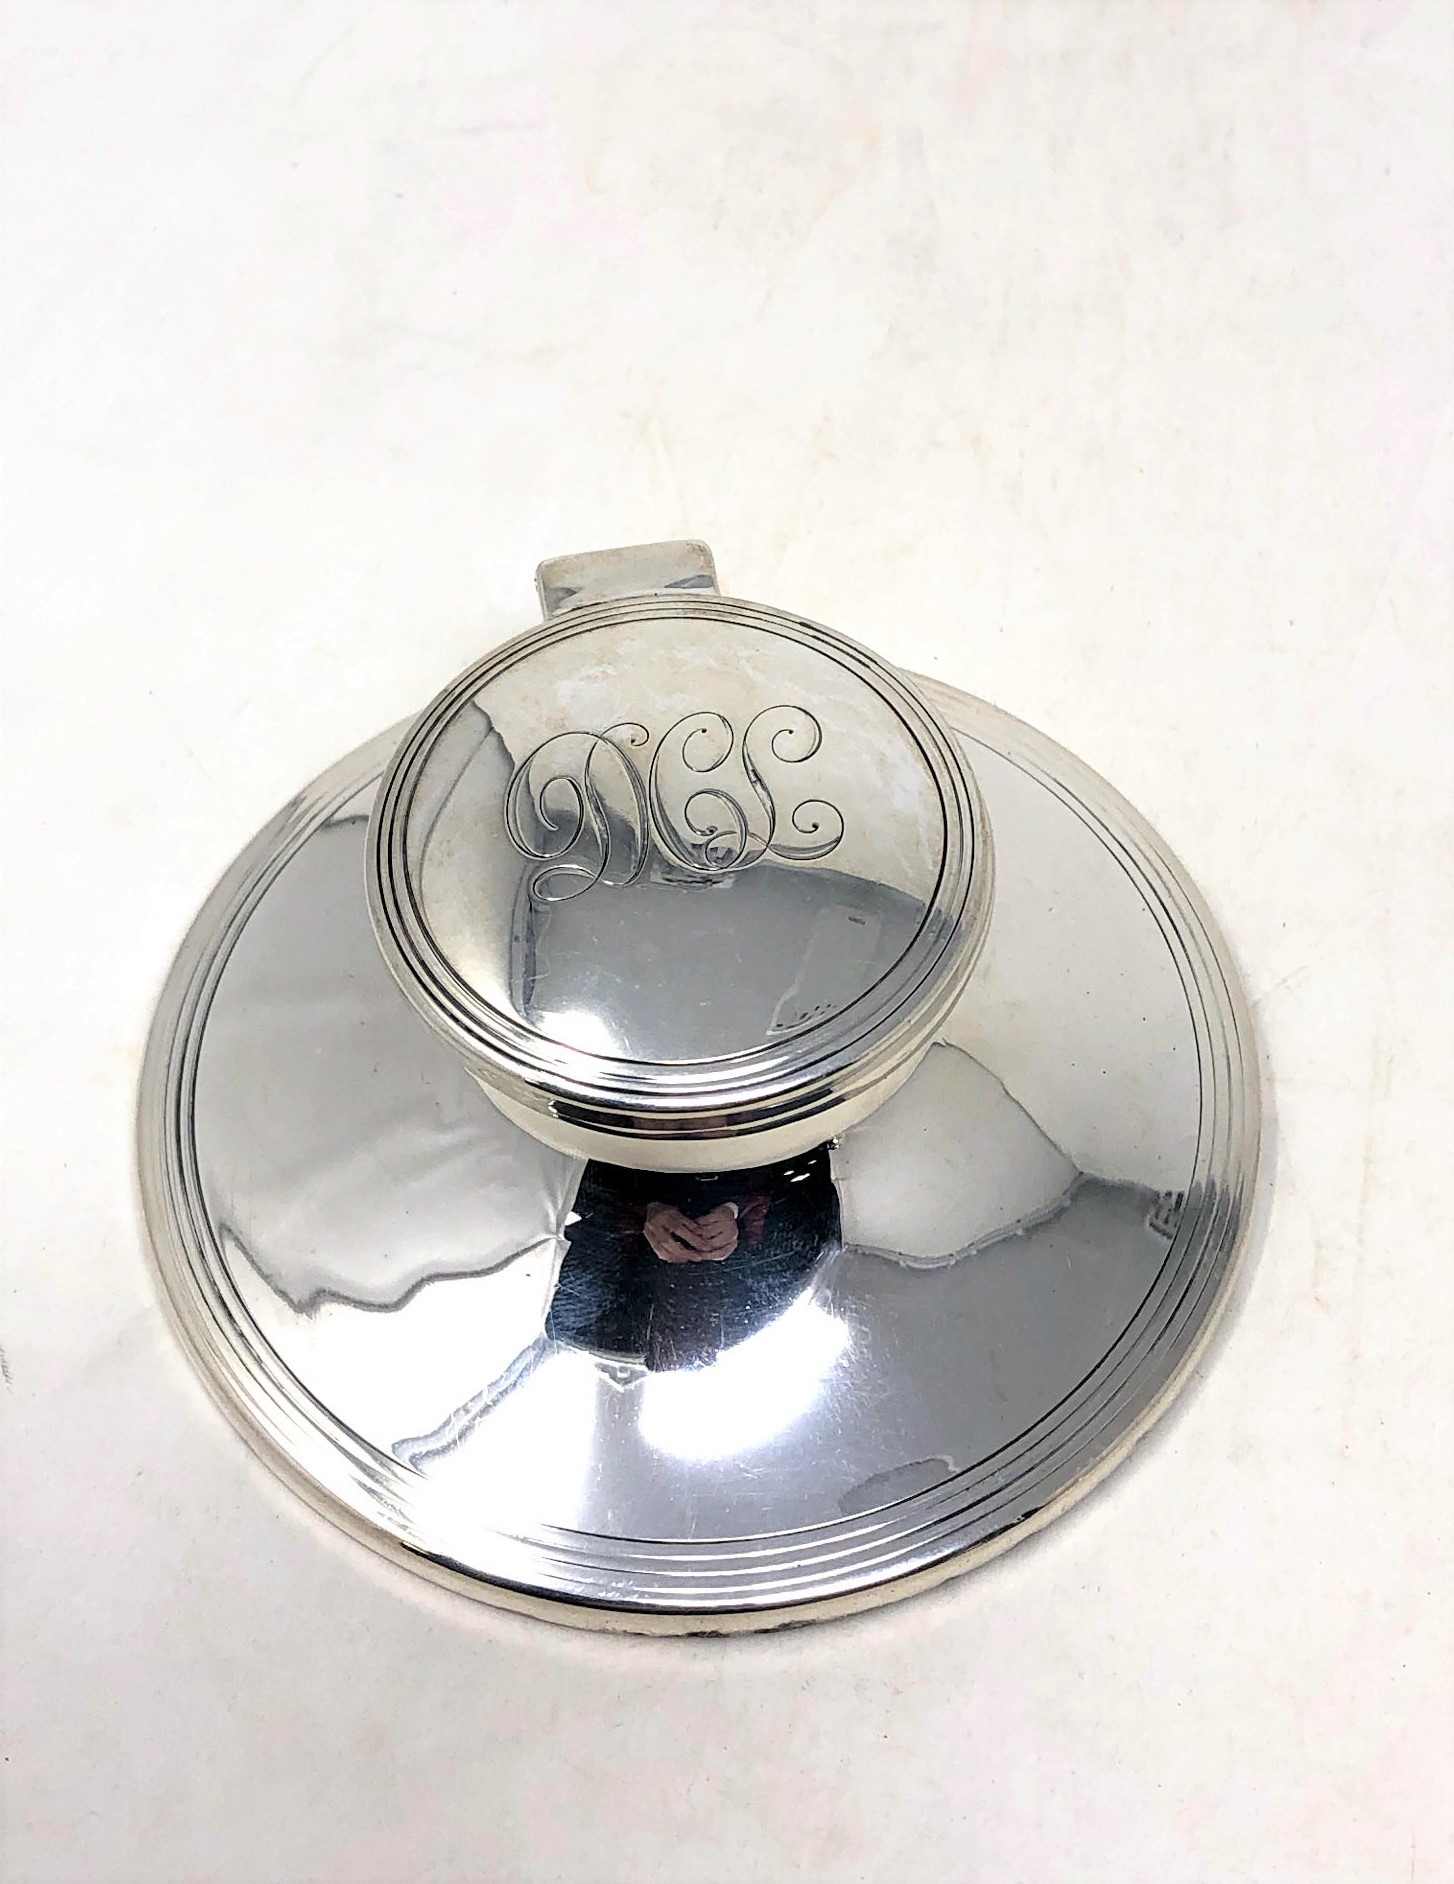 A silver inkwell, Sheffield marks, diameter 10.5cm. - Image 2 of 2